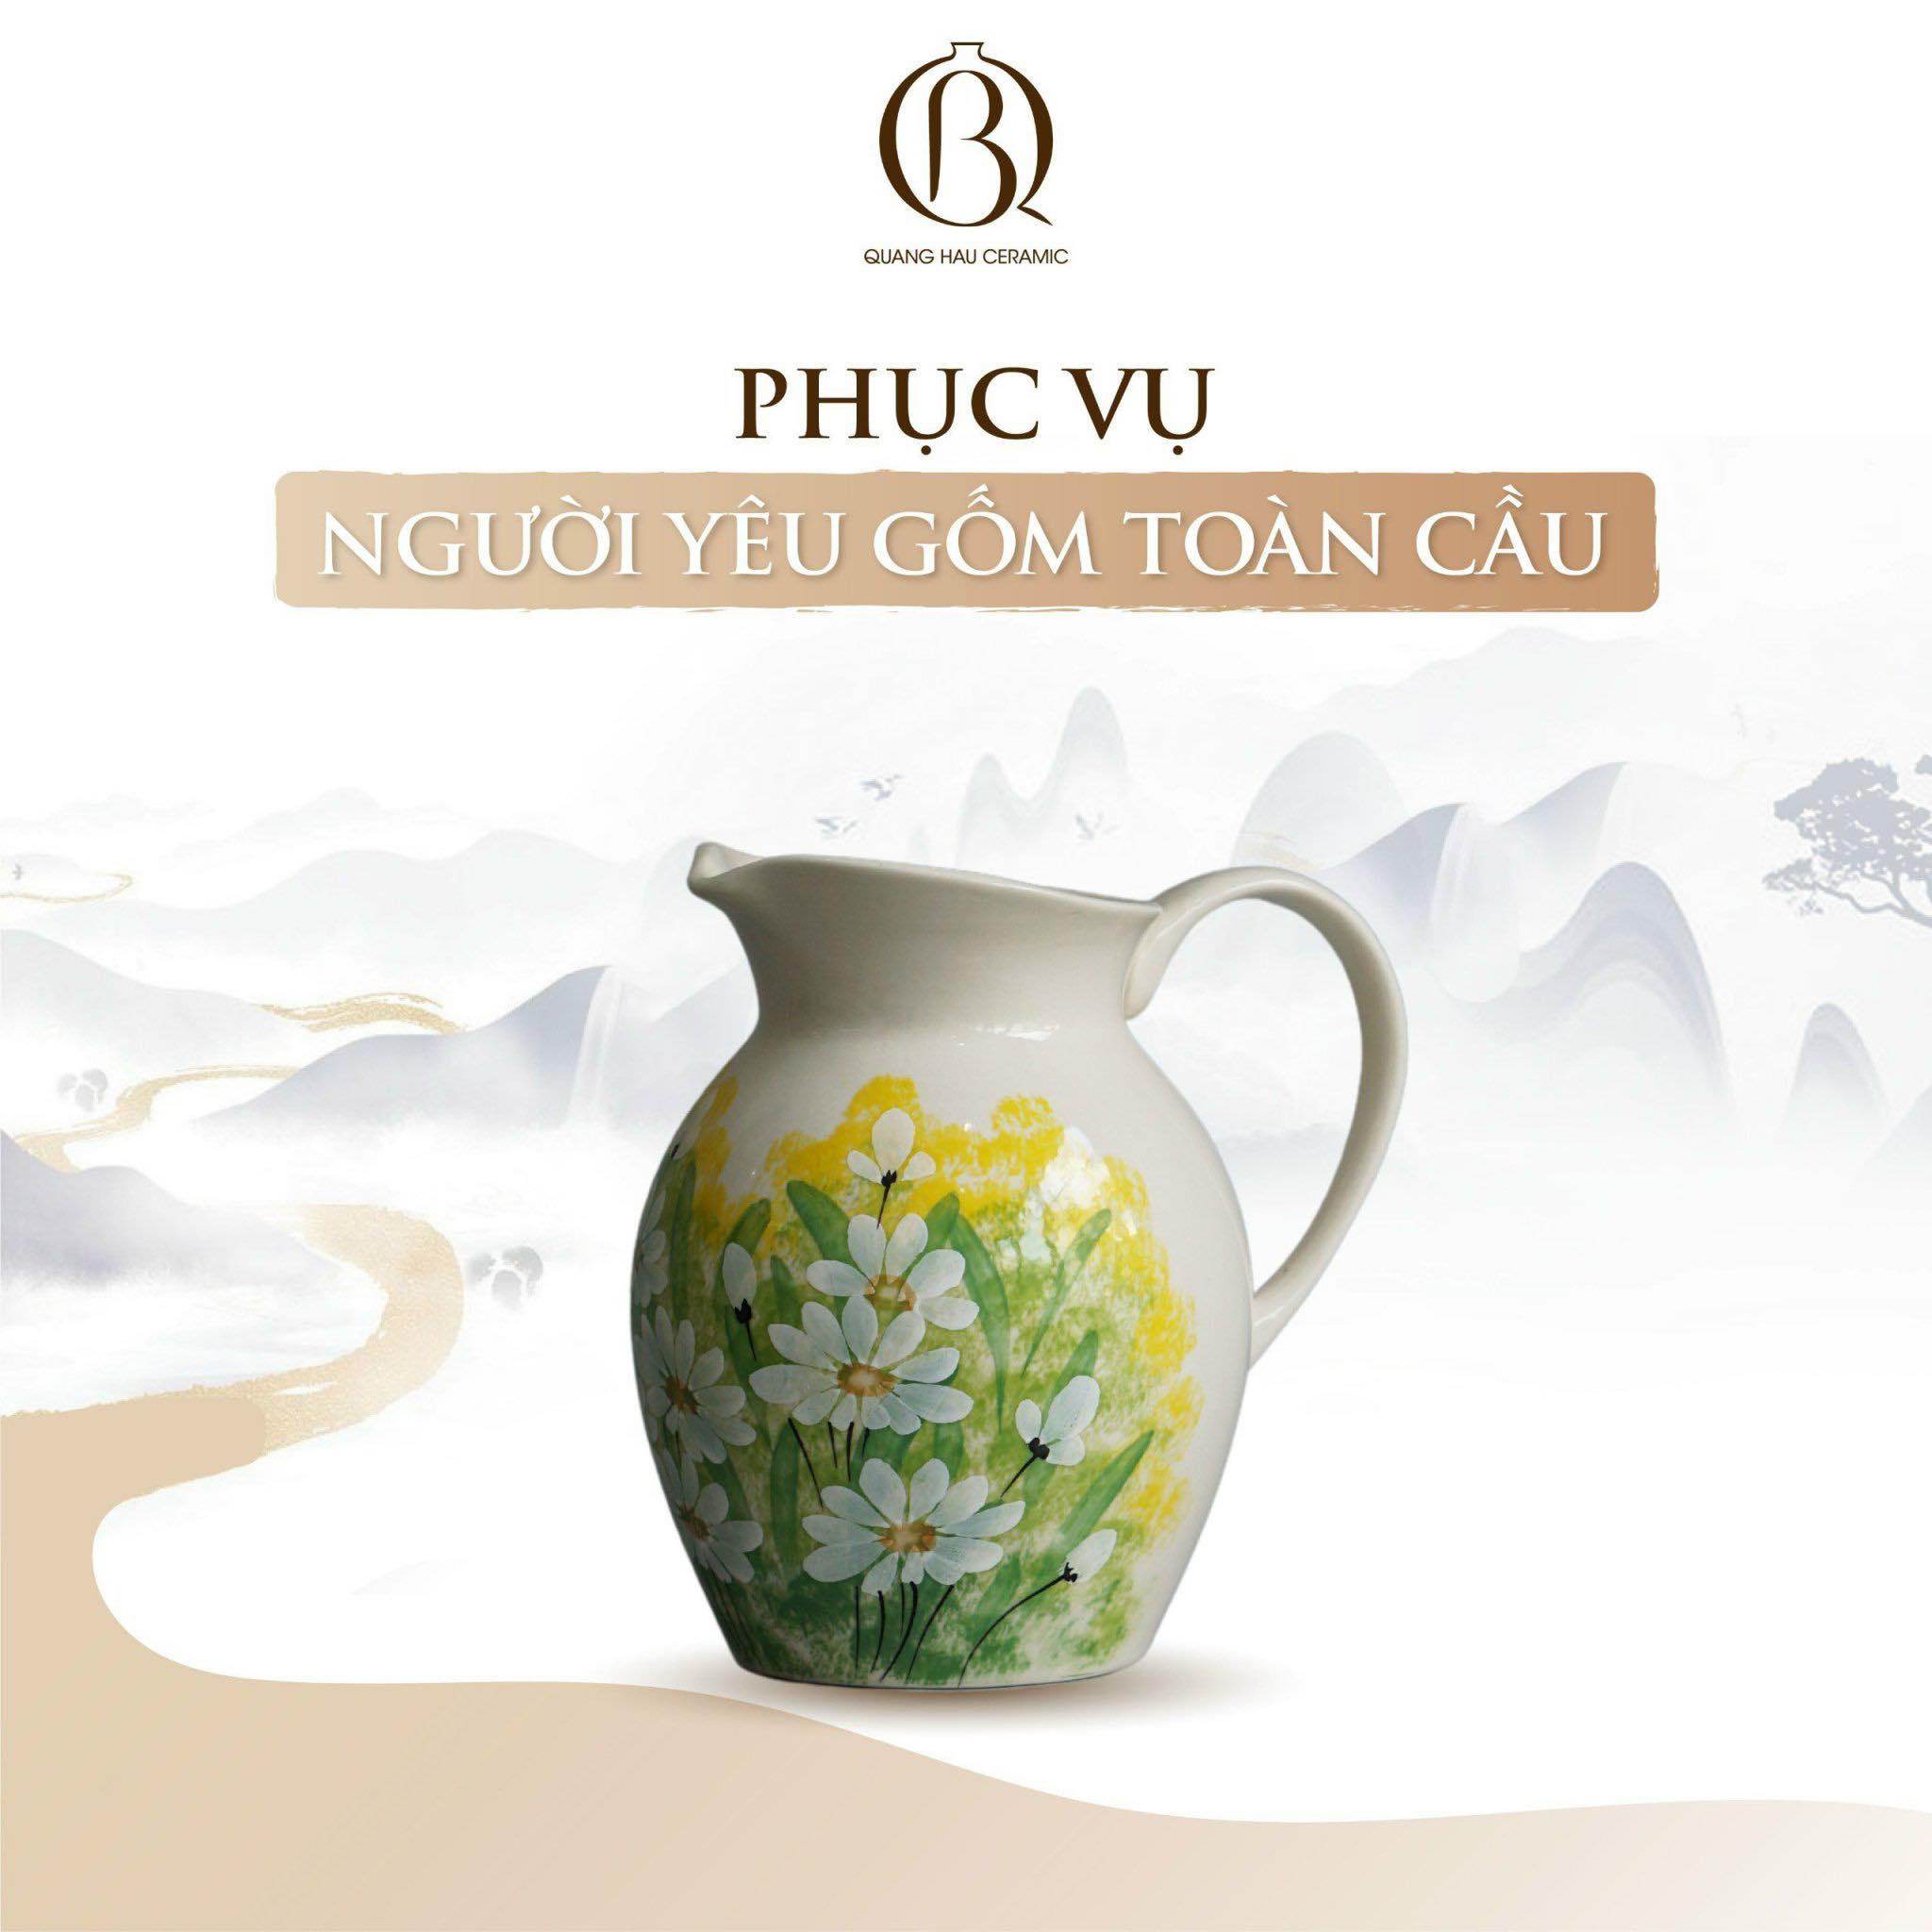 Quang Hau Ceramic Worldwide shipping available now 1